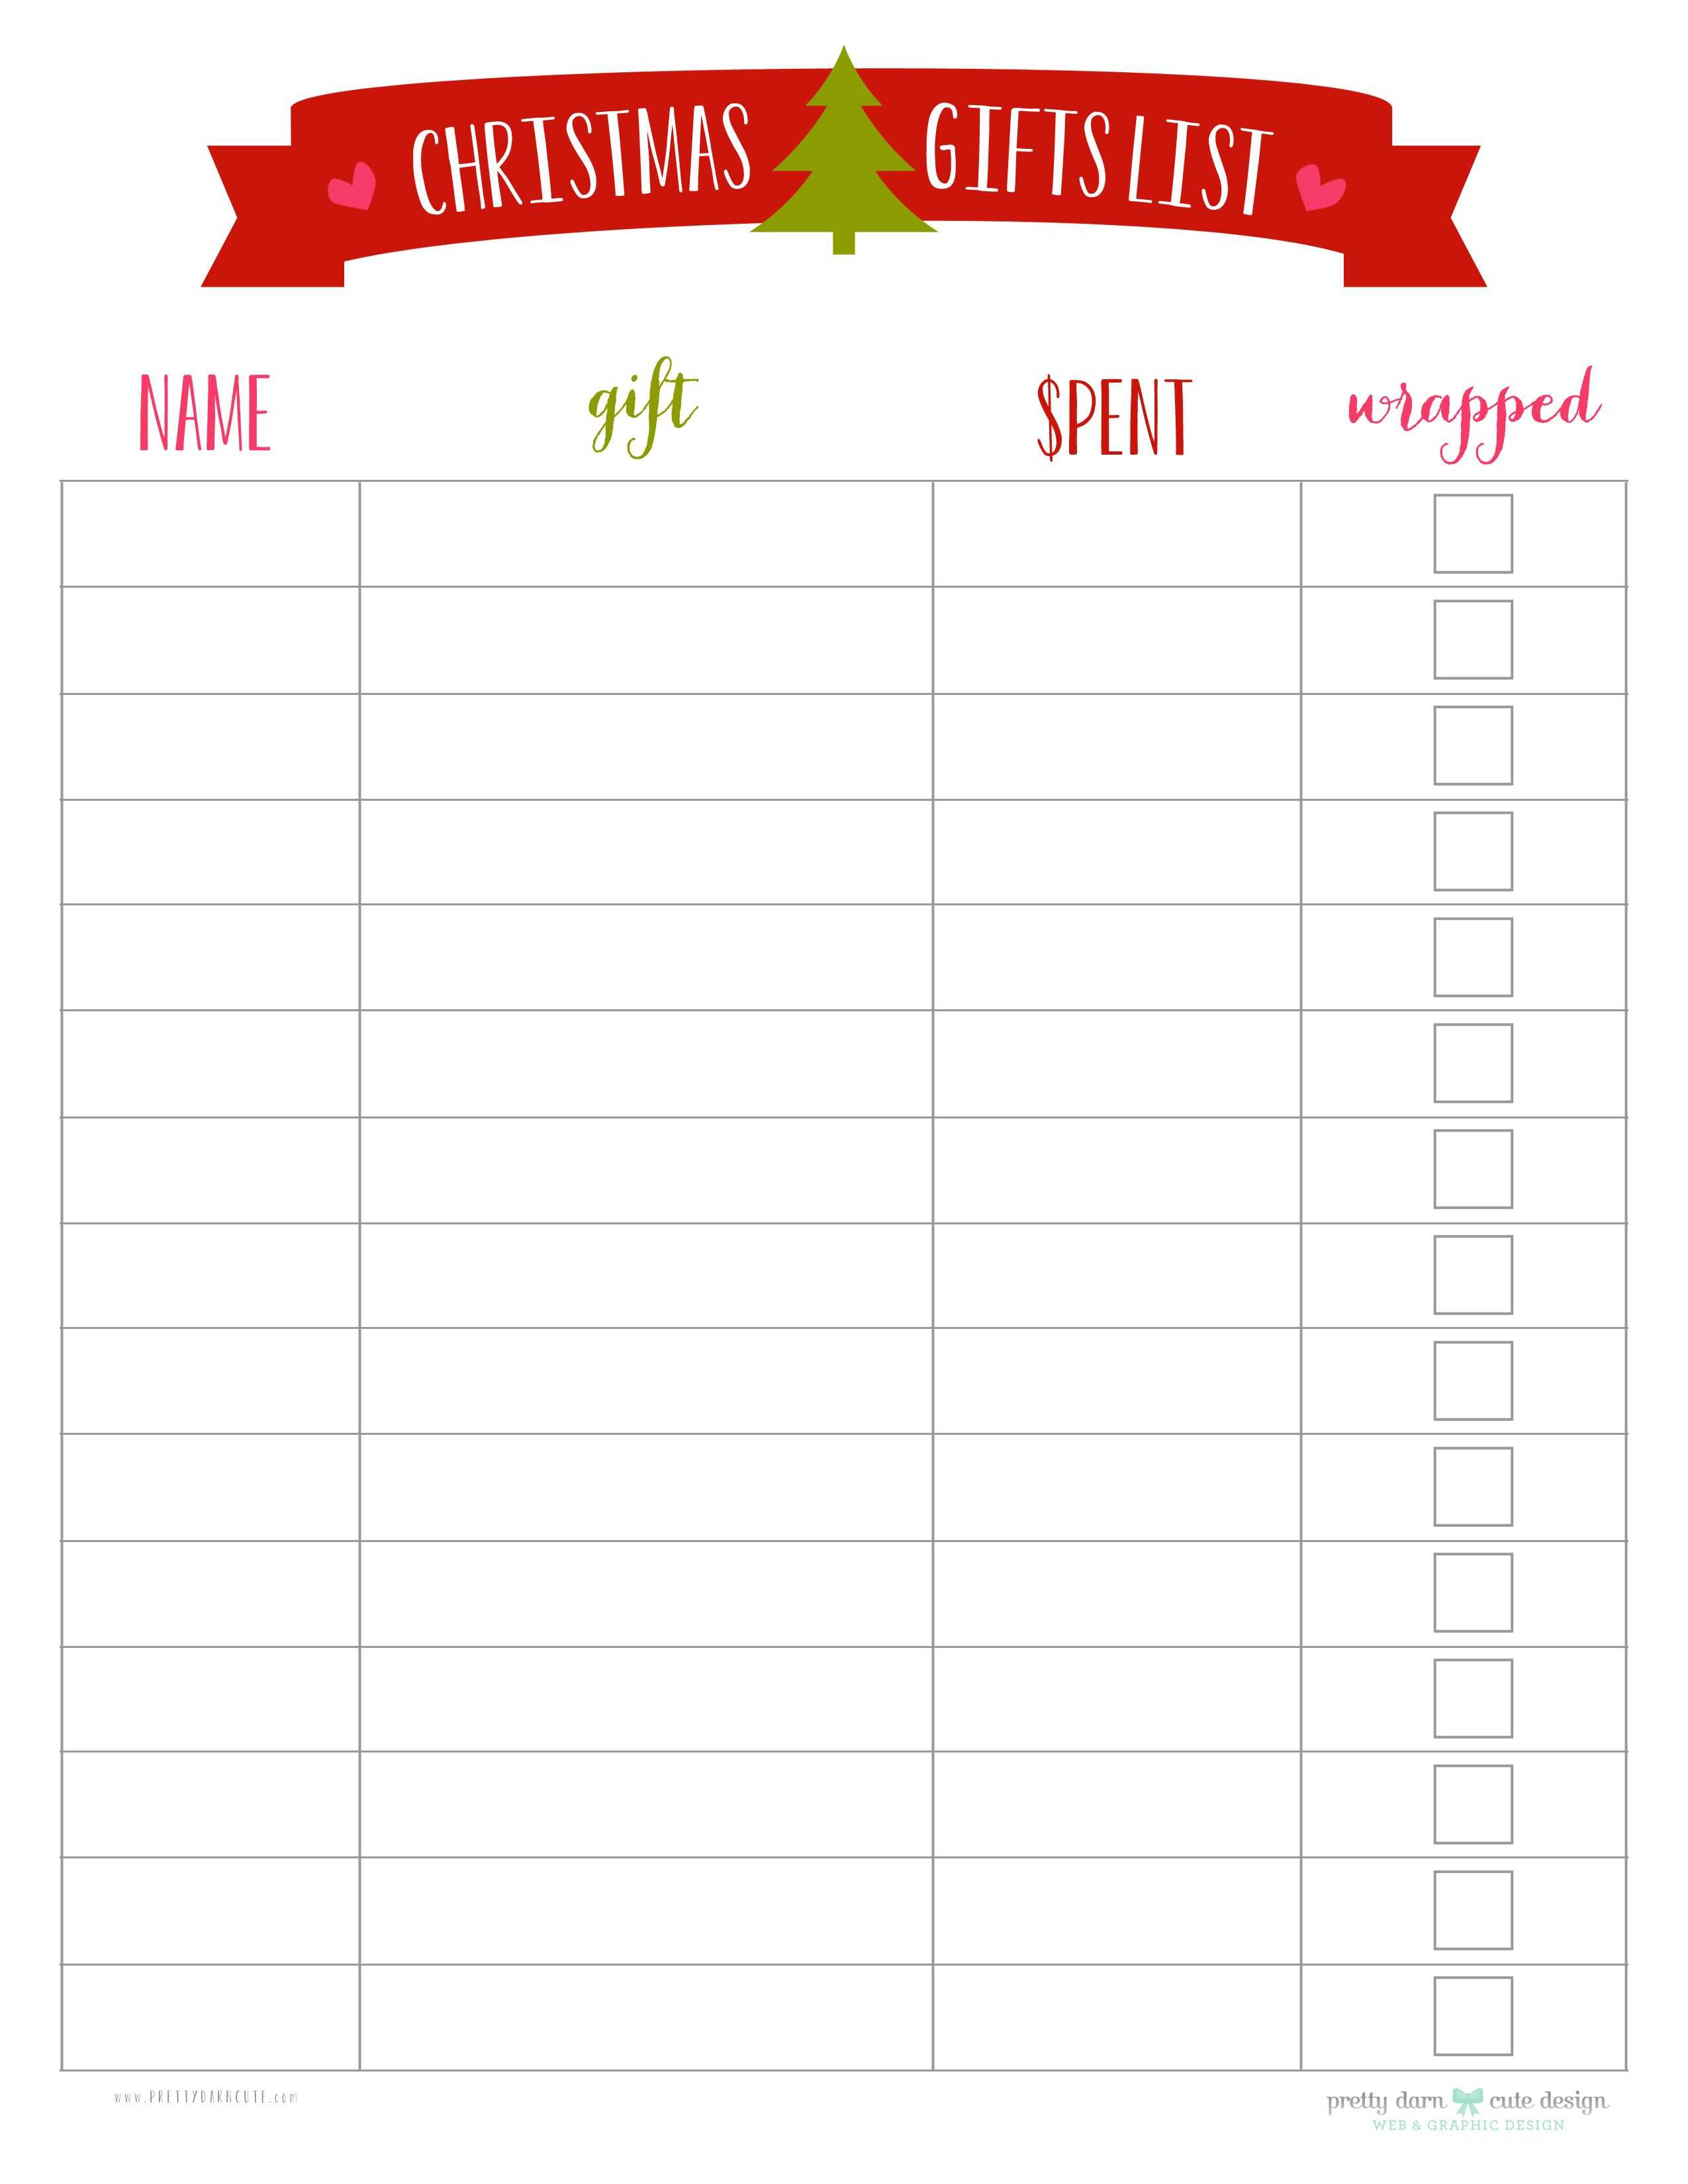 Christmas List Printable, In Case I Decide To Feel Organized With Christmas Card List Template